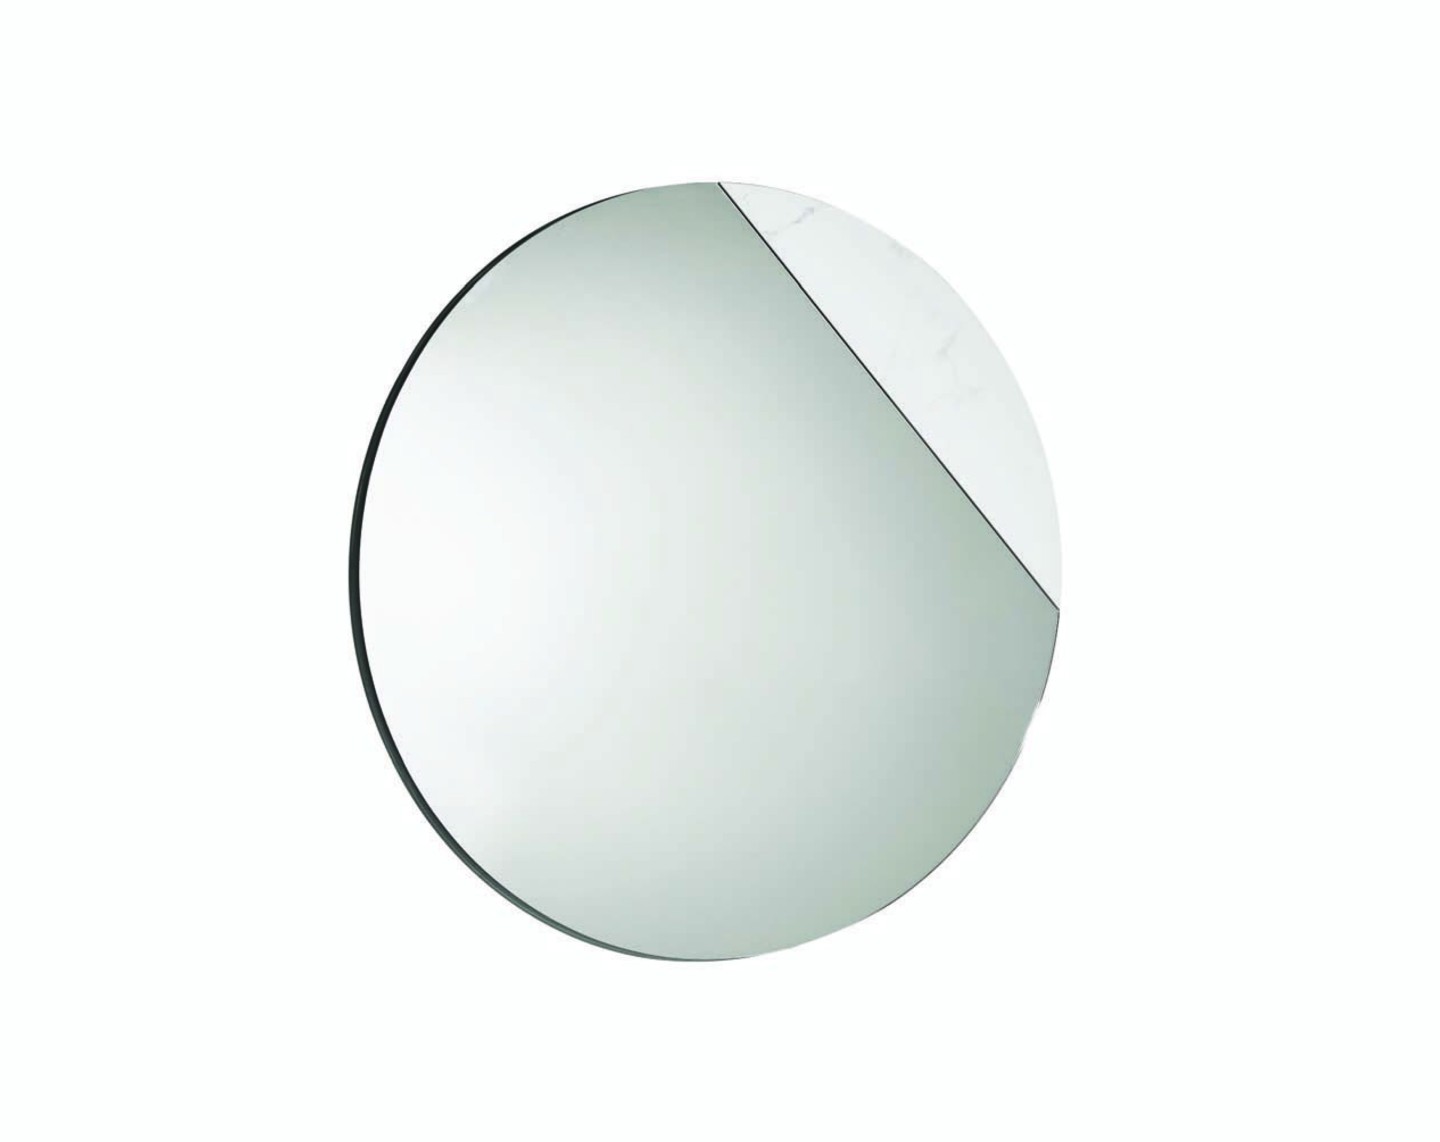 THE SELFIE MIRROR WITH CERAMIC DETAIL